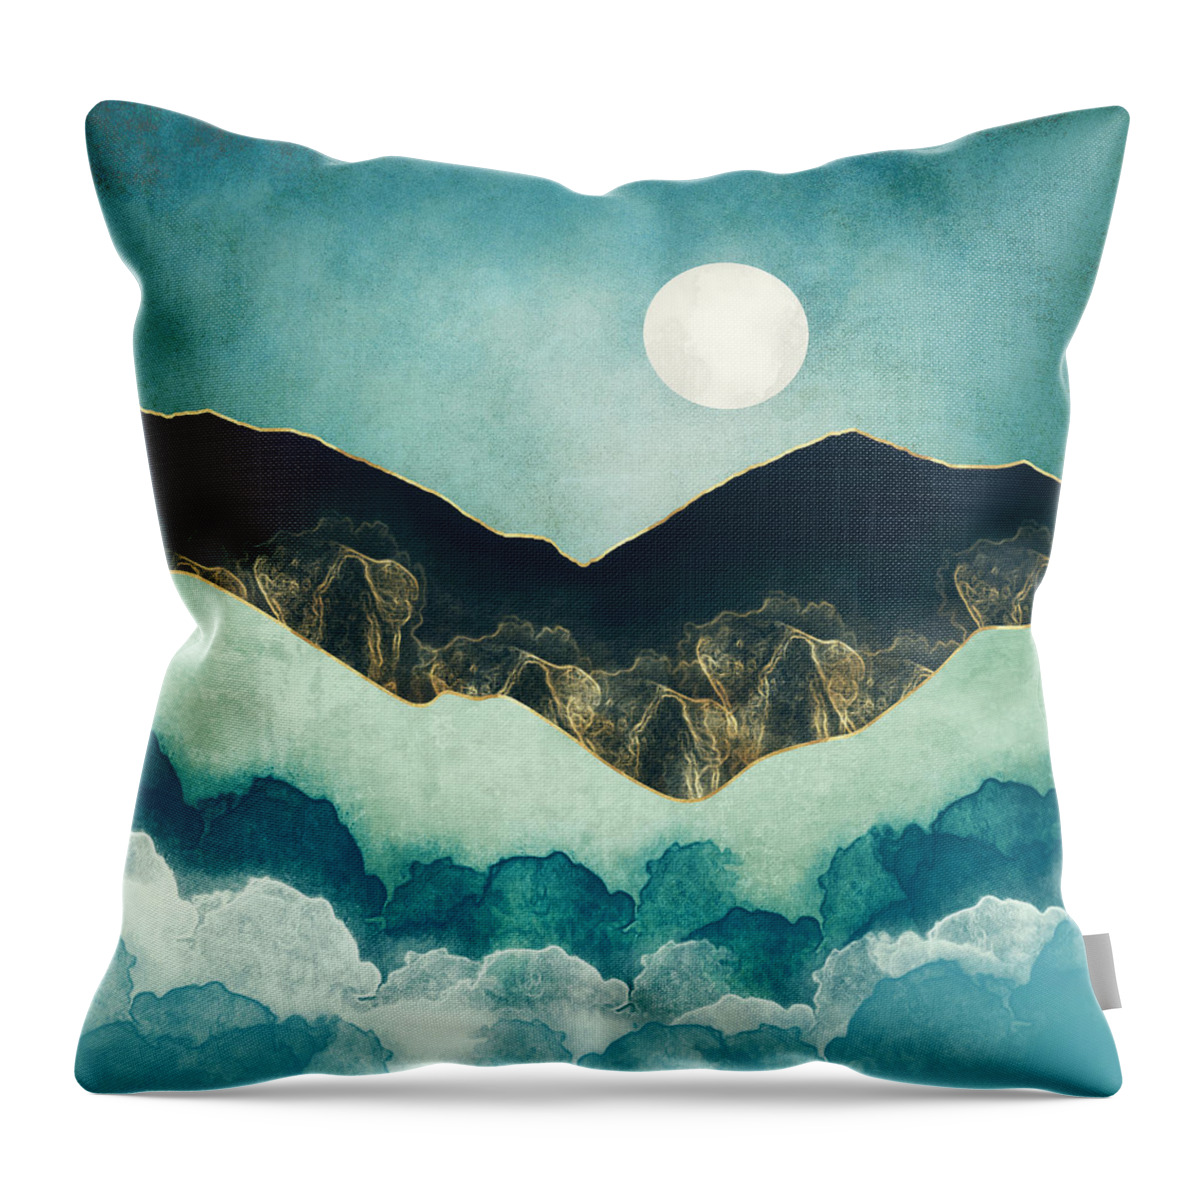 Moon Throw Pillow featuring the digital art Moon Mist by Spacefrog Designs